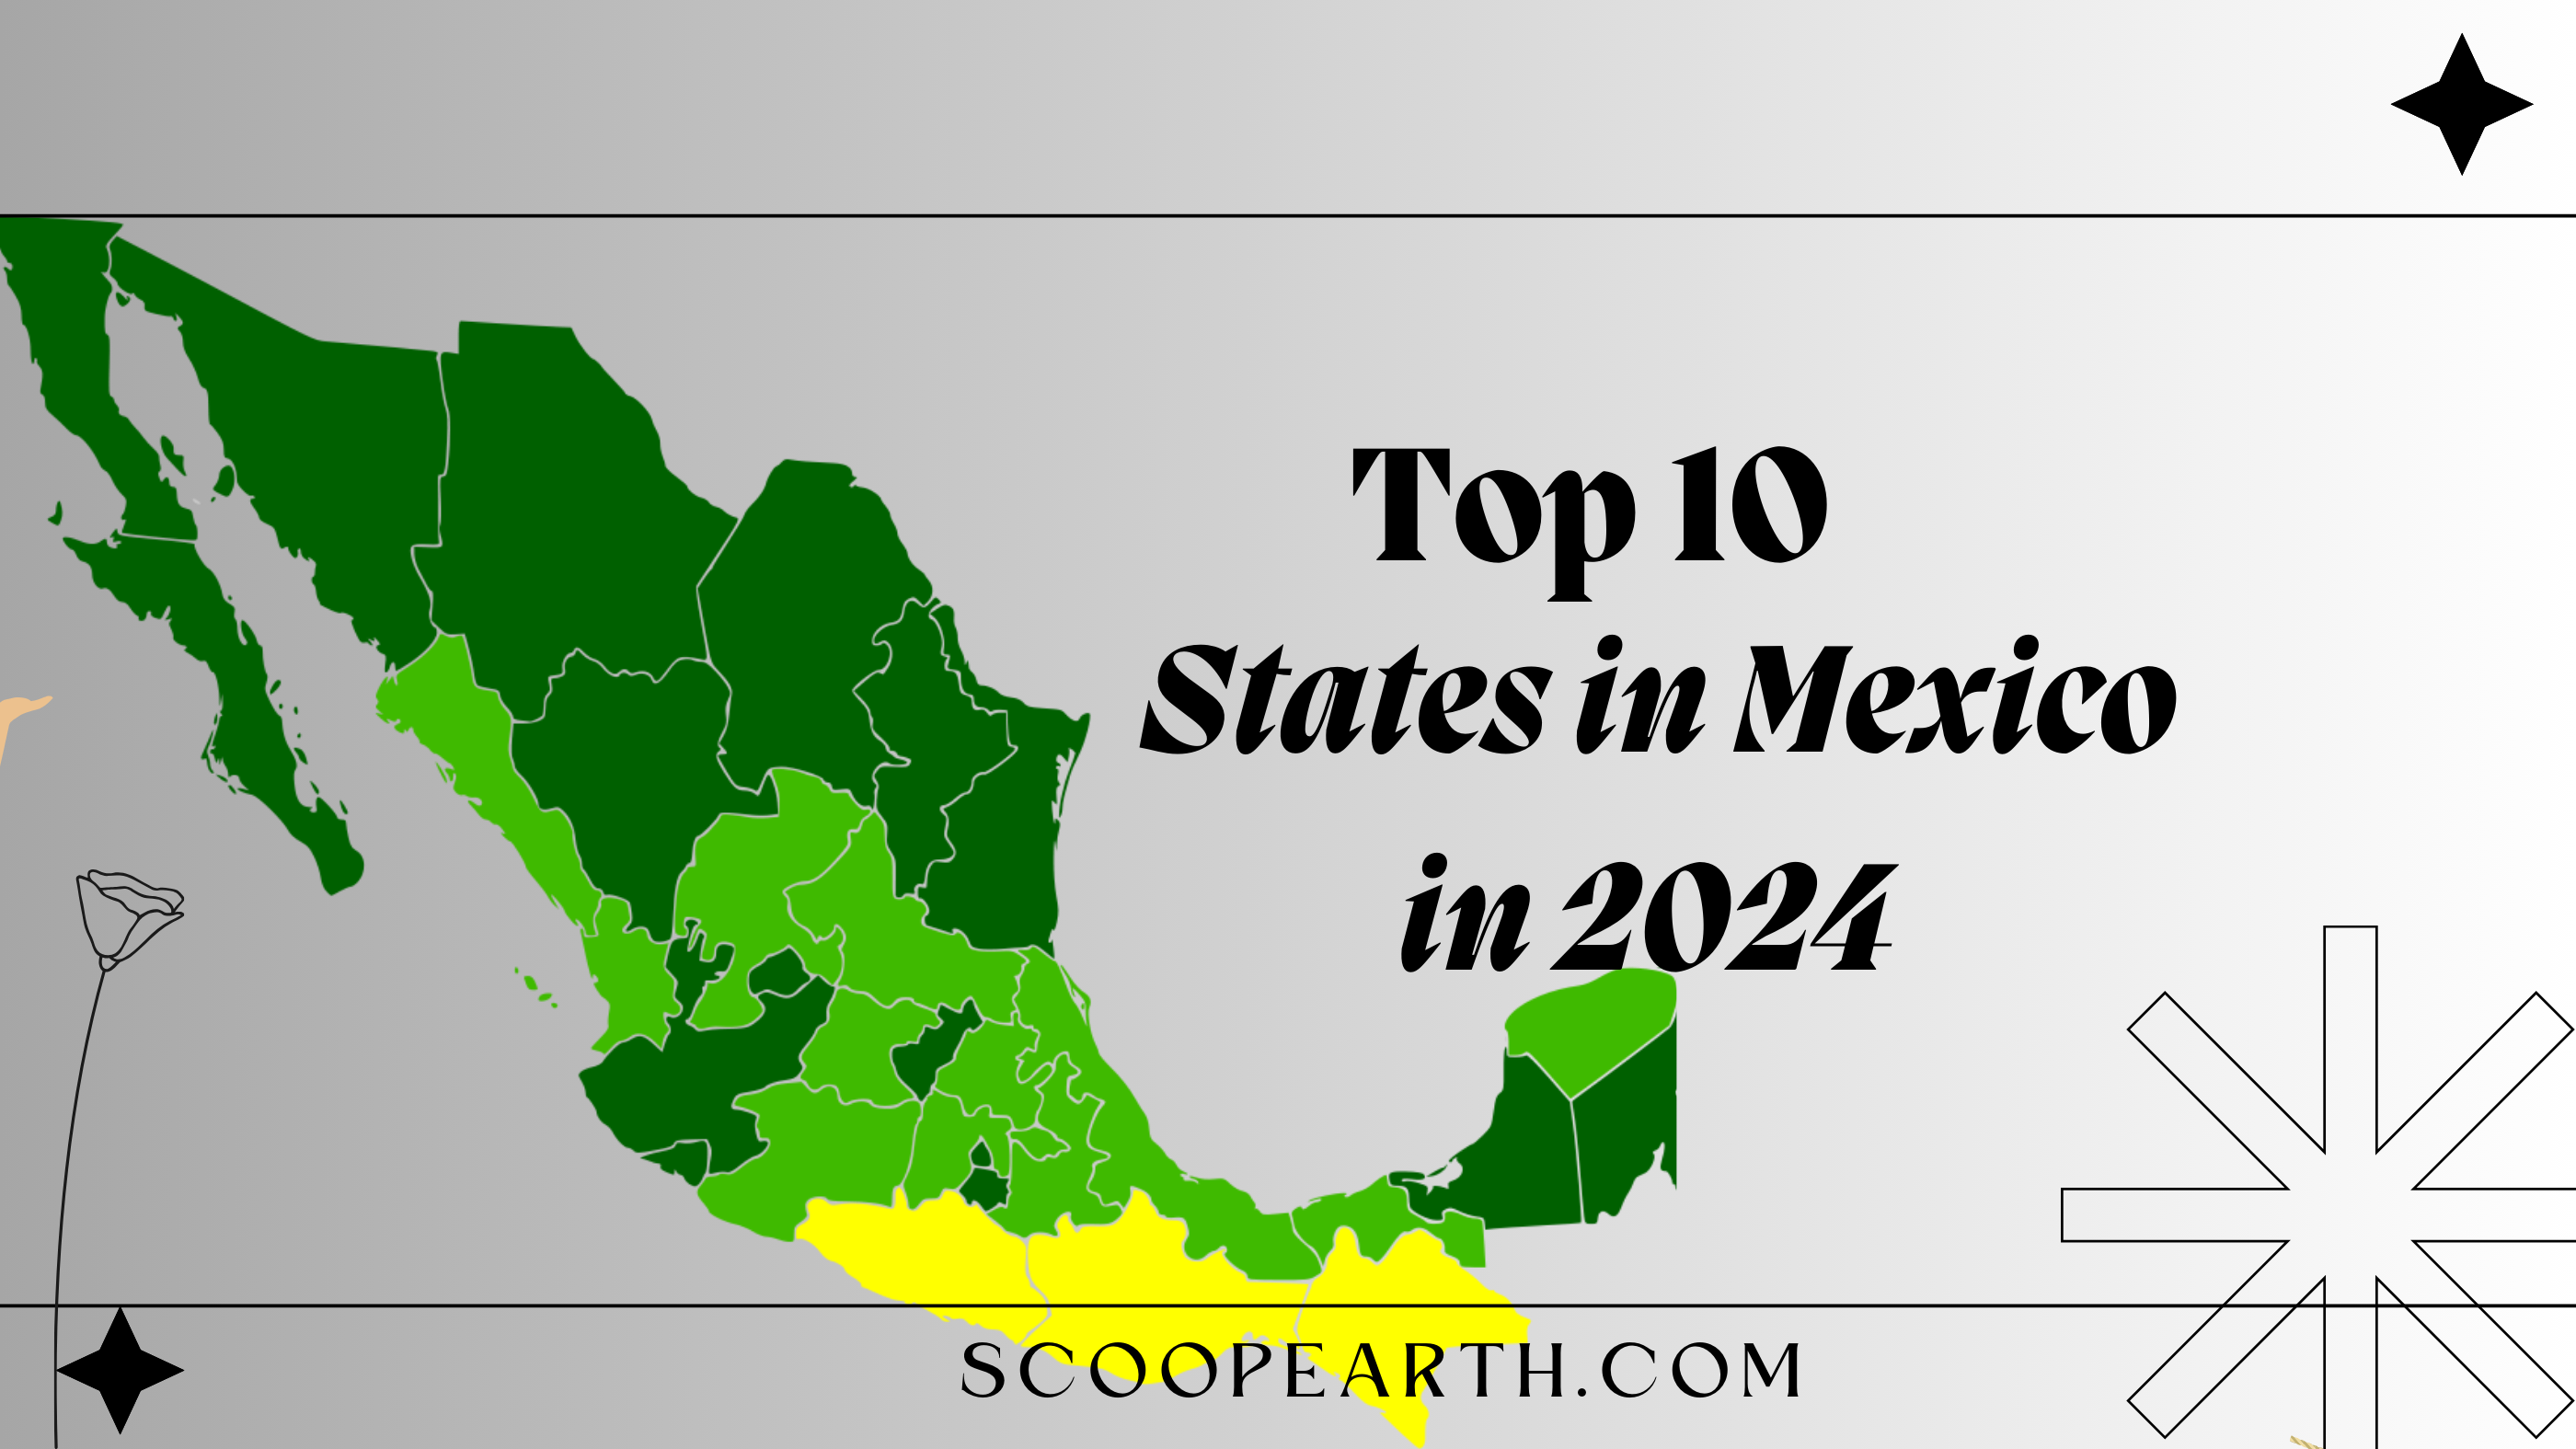 Top 10 States in Mexico in 2024